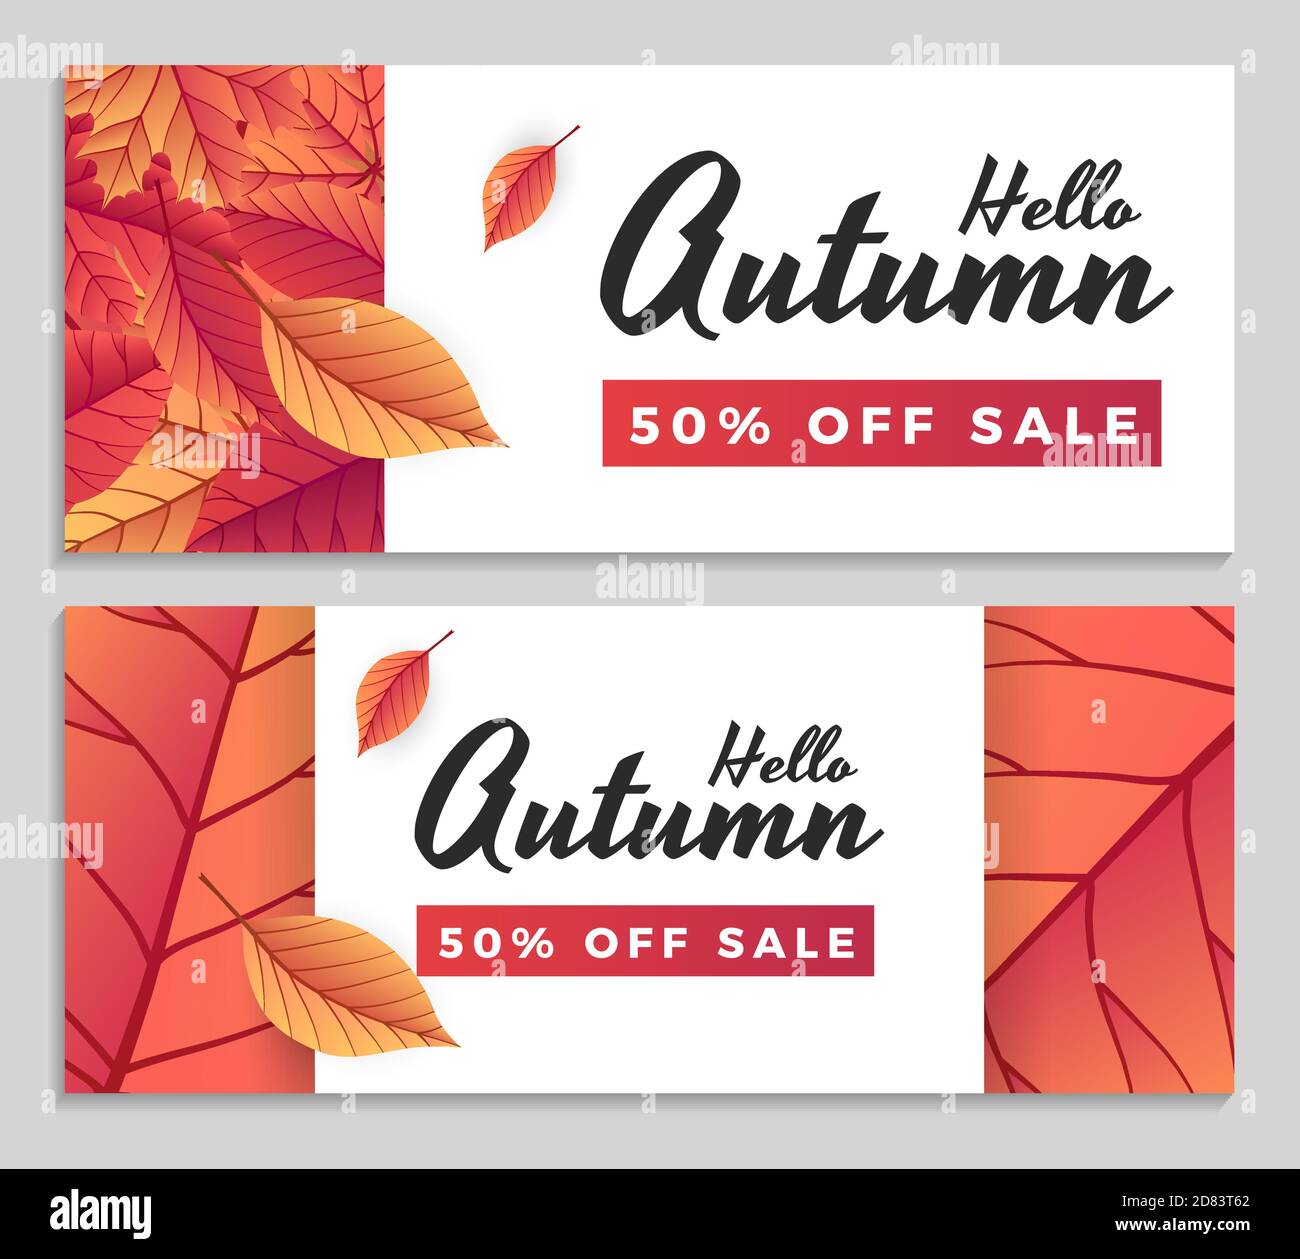 Autumn sale banner template with lettering. Bright fall leaves. Poster, card, label, banner design. Ideal for shopping sale or web banner. Bright geom Stock Vector